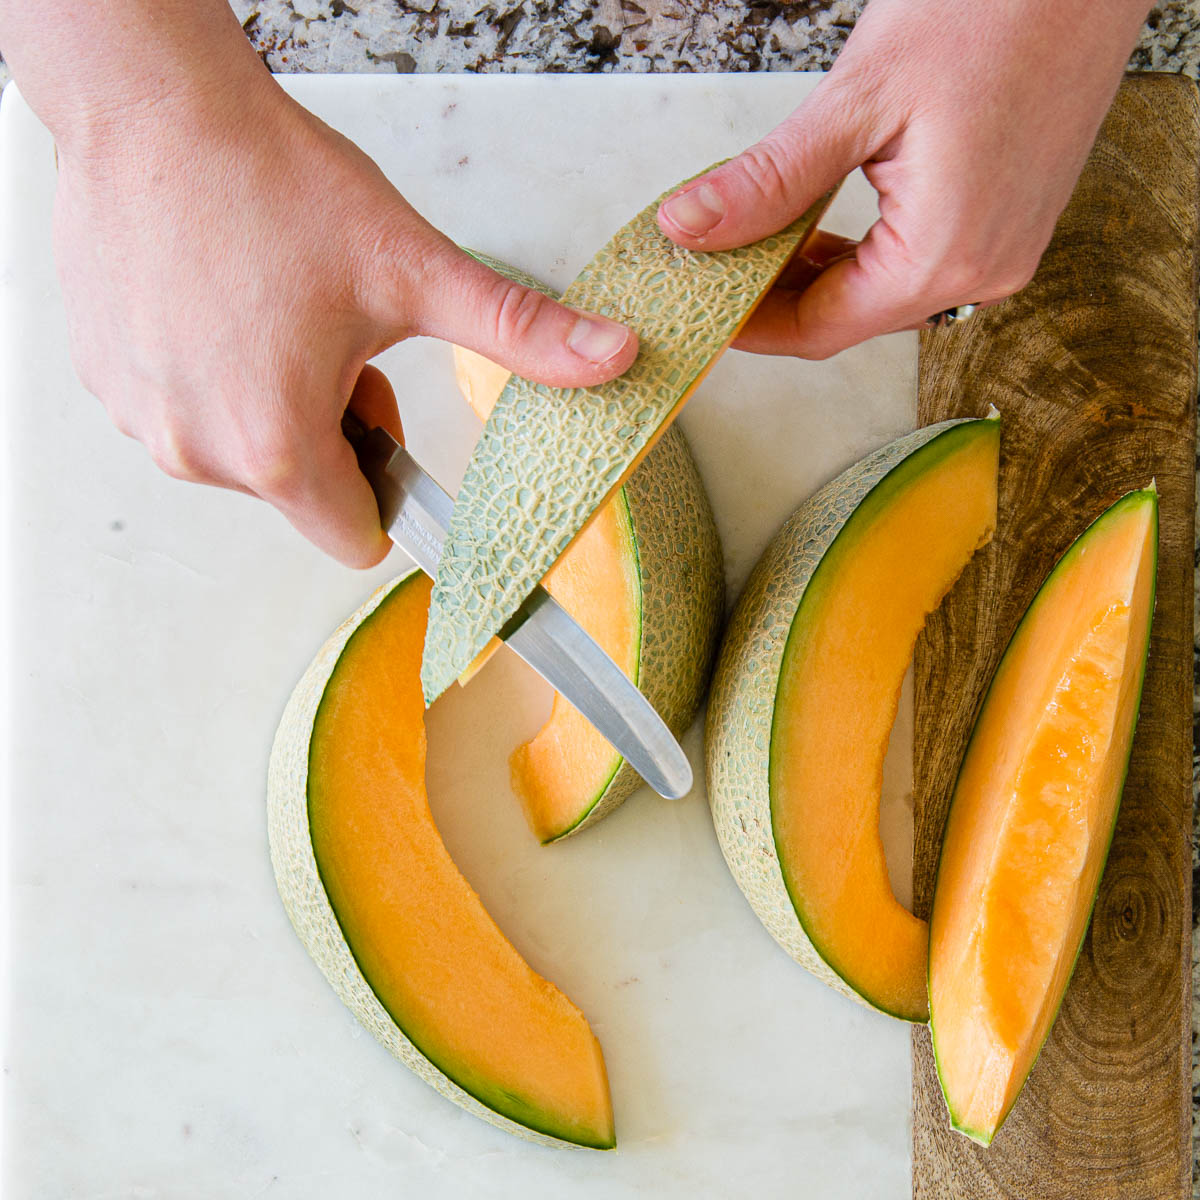 slicing the rind away from the cantaloup wedges.